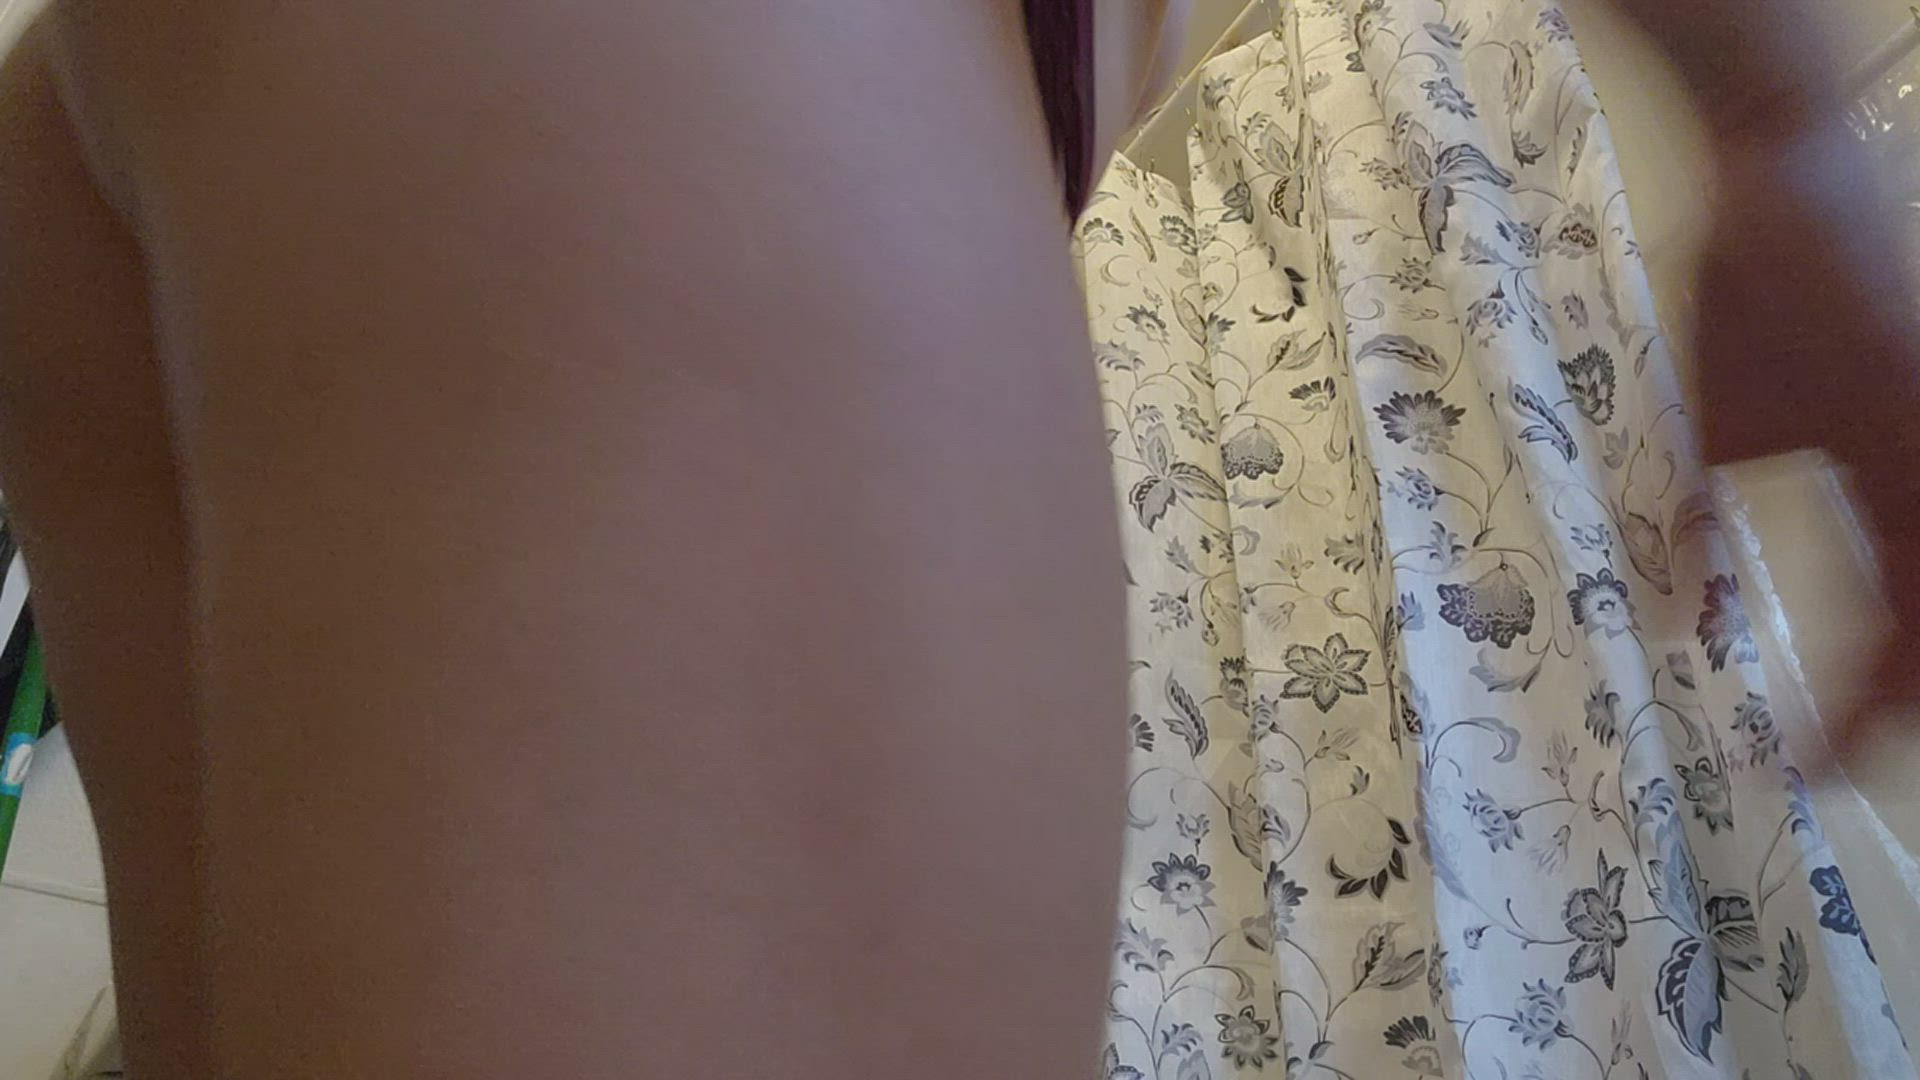 Ass porn video with onlyfans model missdynamitegal <strong>@missdynamitegal</strong>